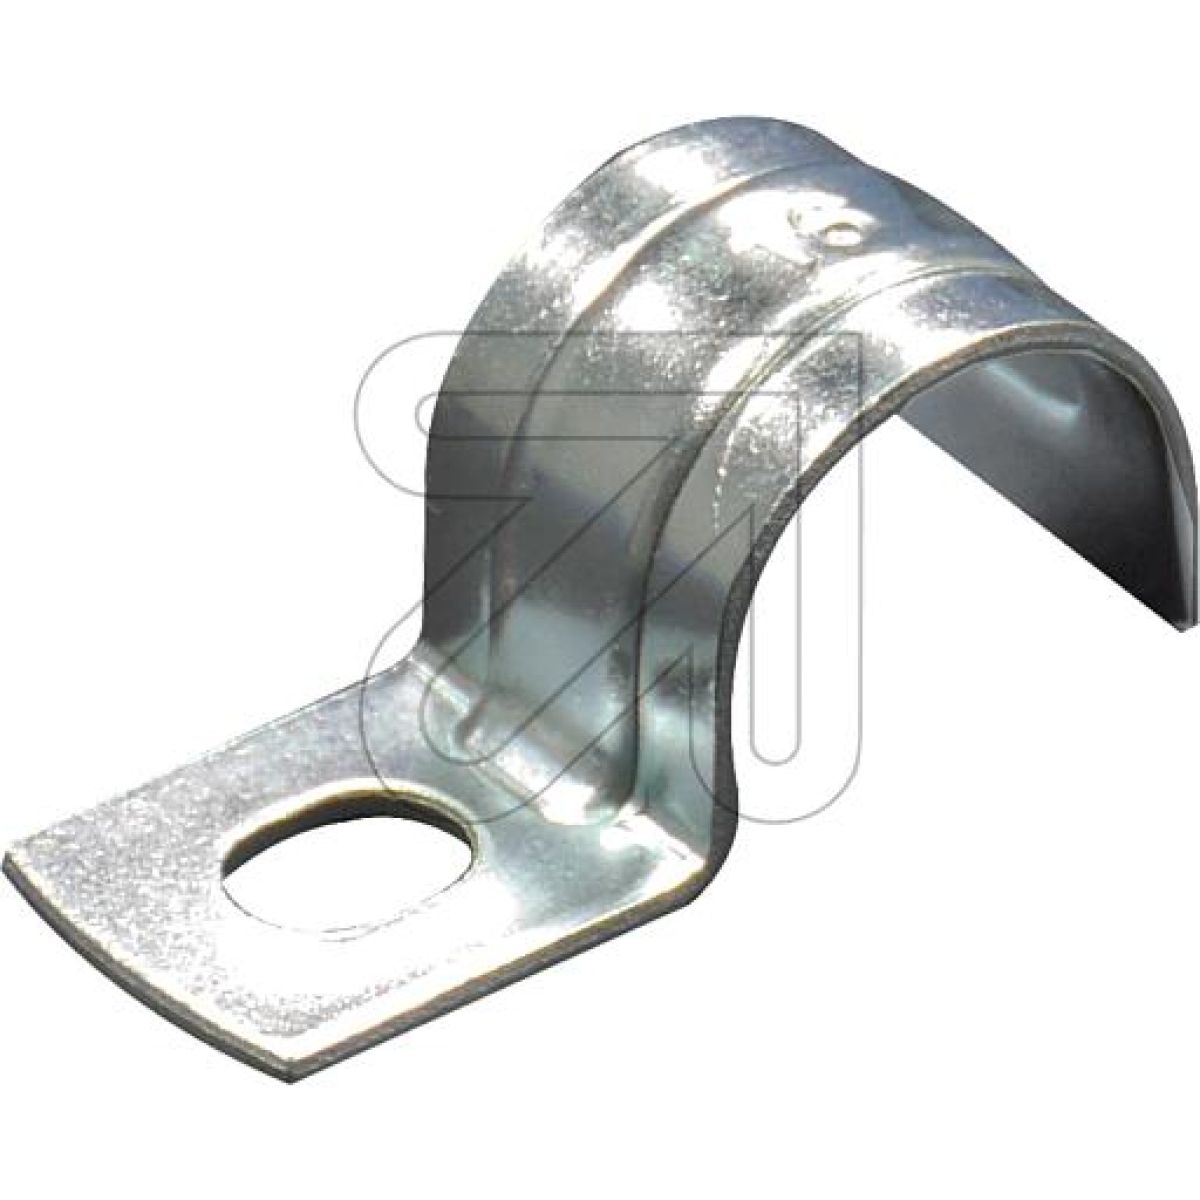 EGBfastening clamp M25, single-loop, light version-Price for 100 pcs.Article-No: 193470